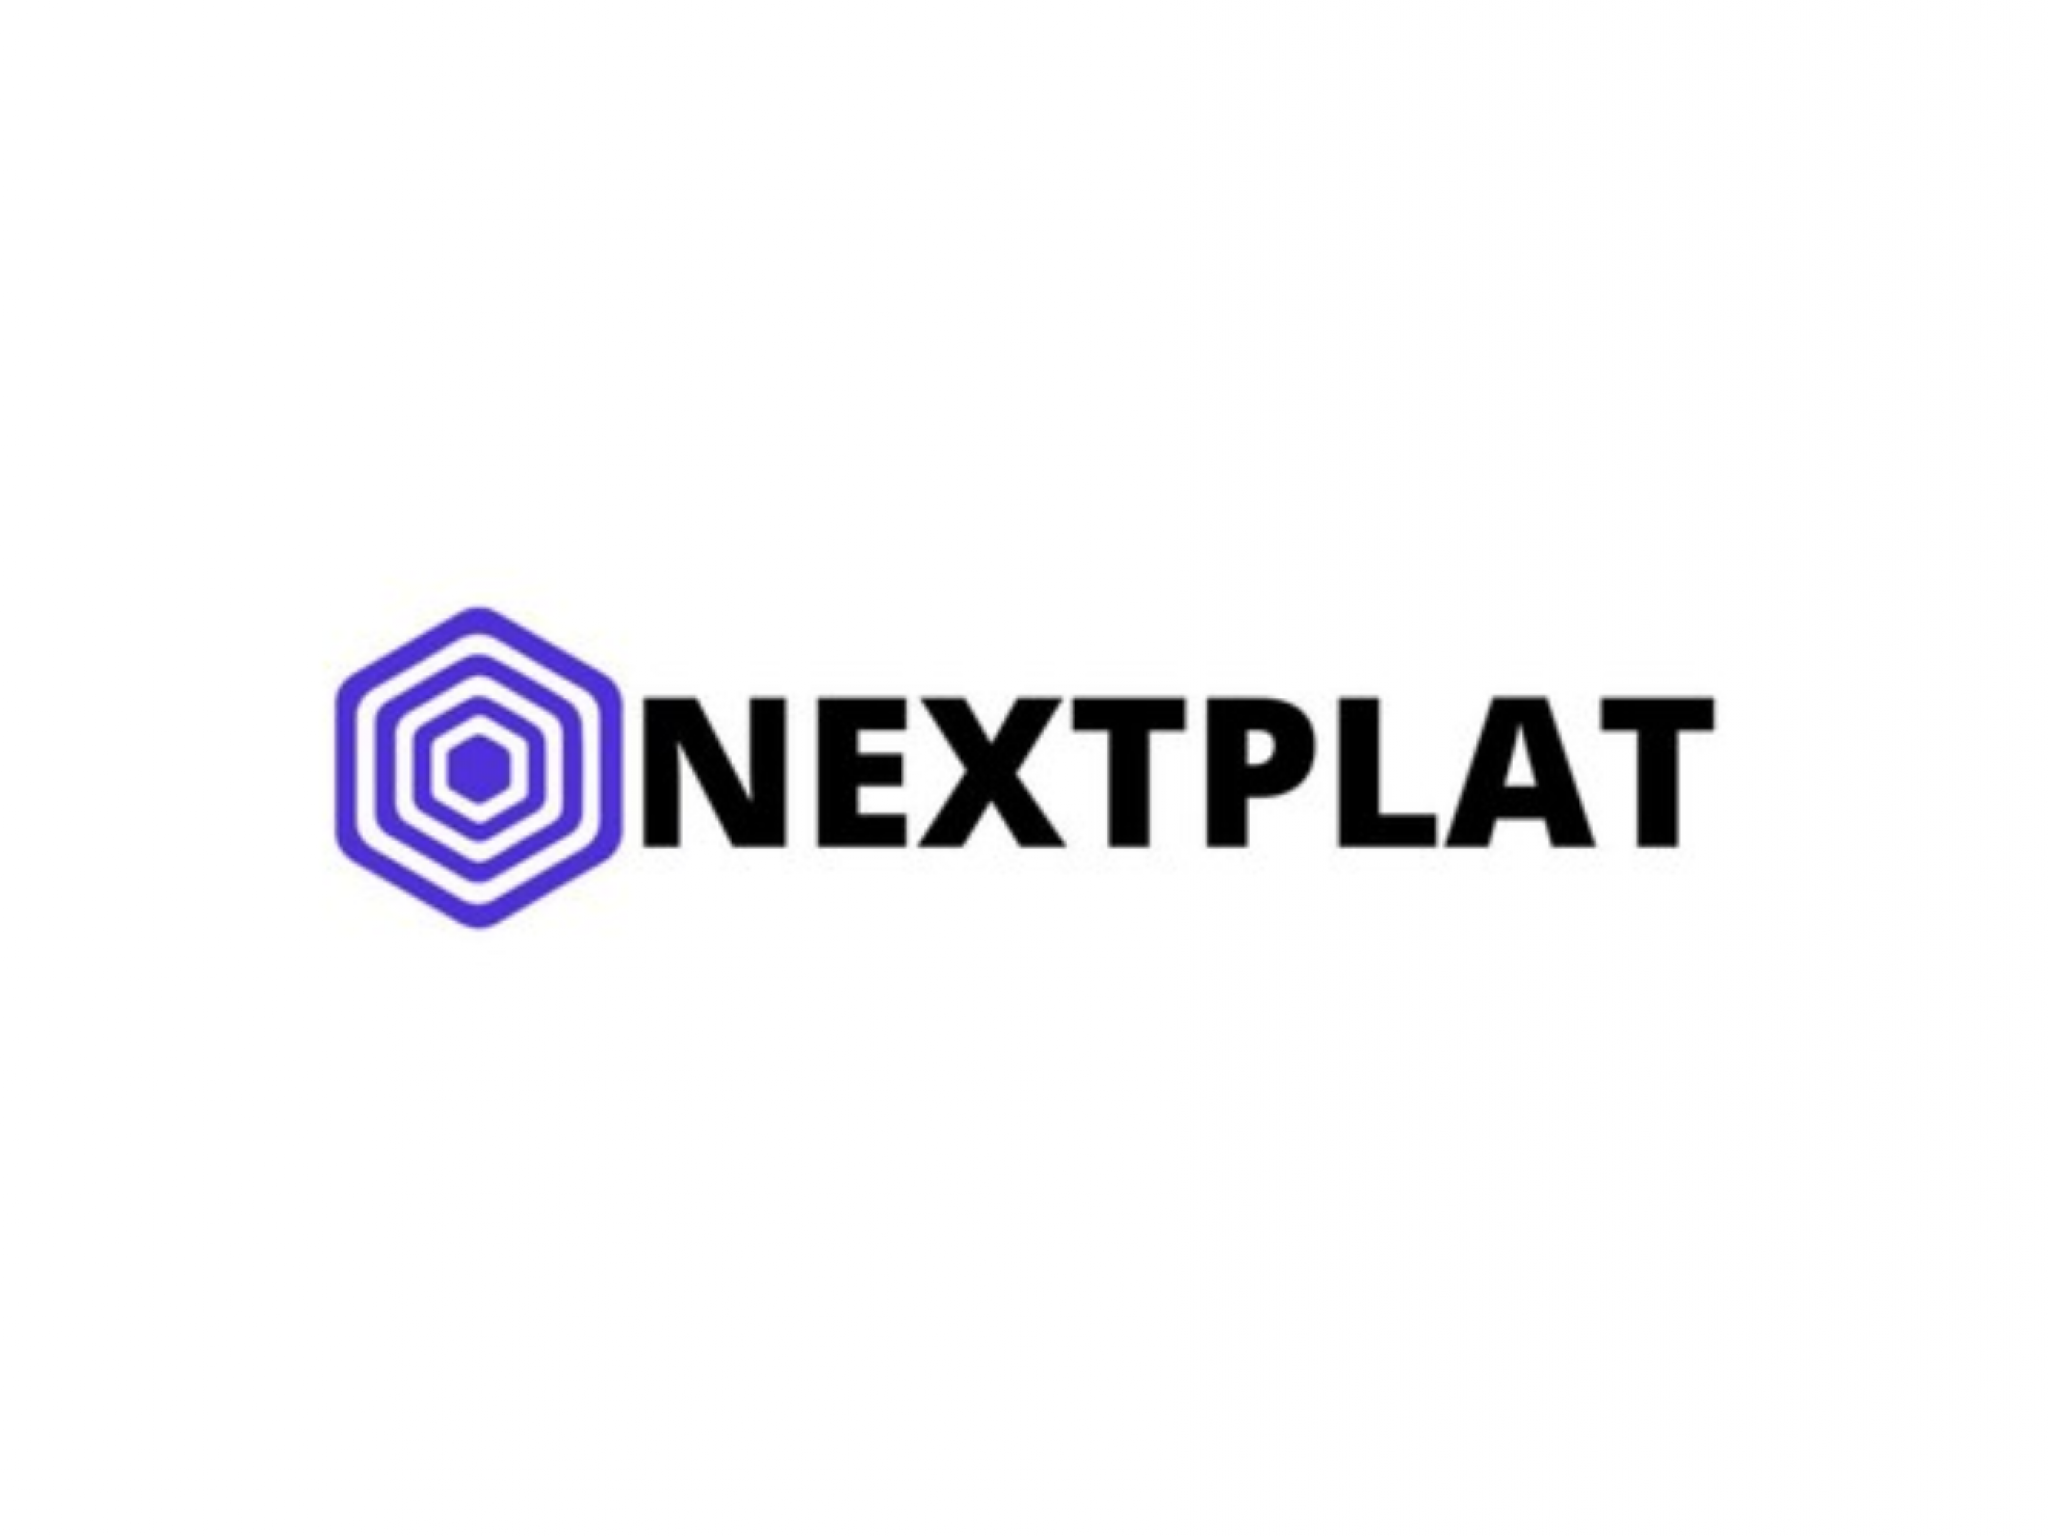  why-e-commerce-platform-nextplat-shares-are-shooting-higher-today 